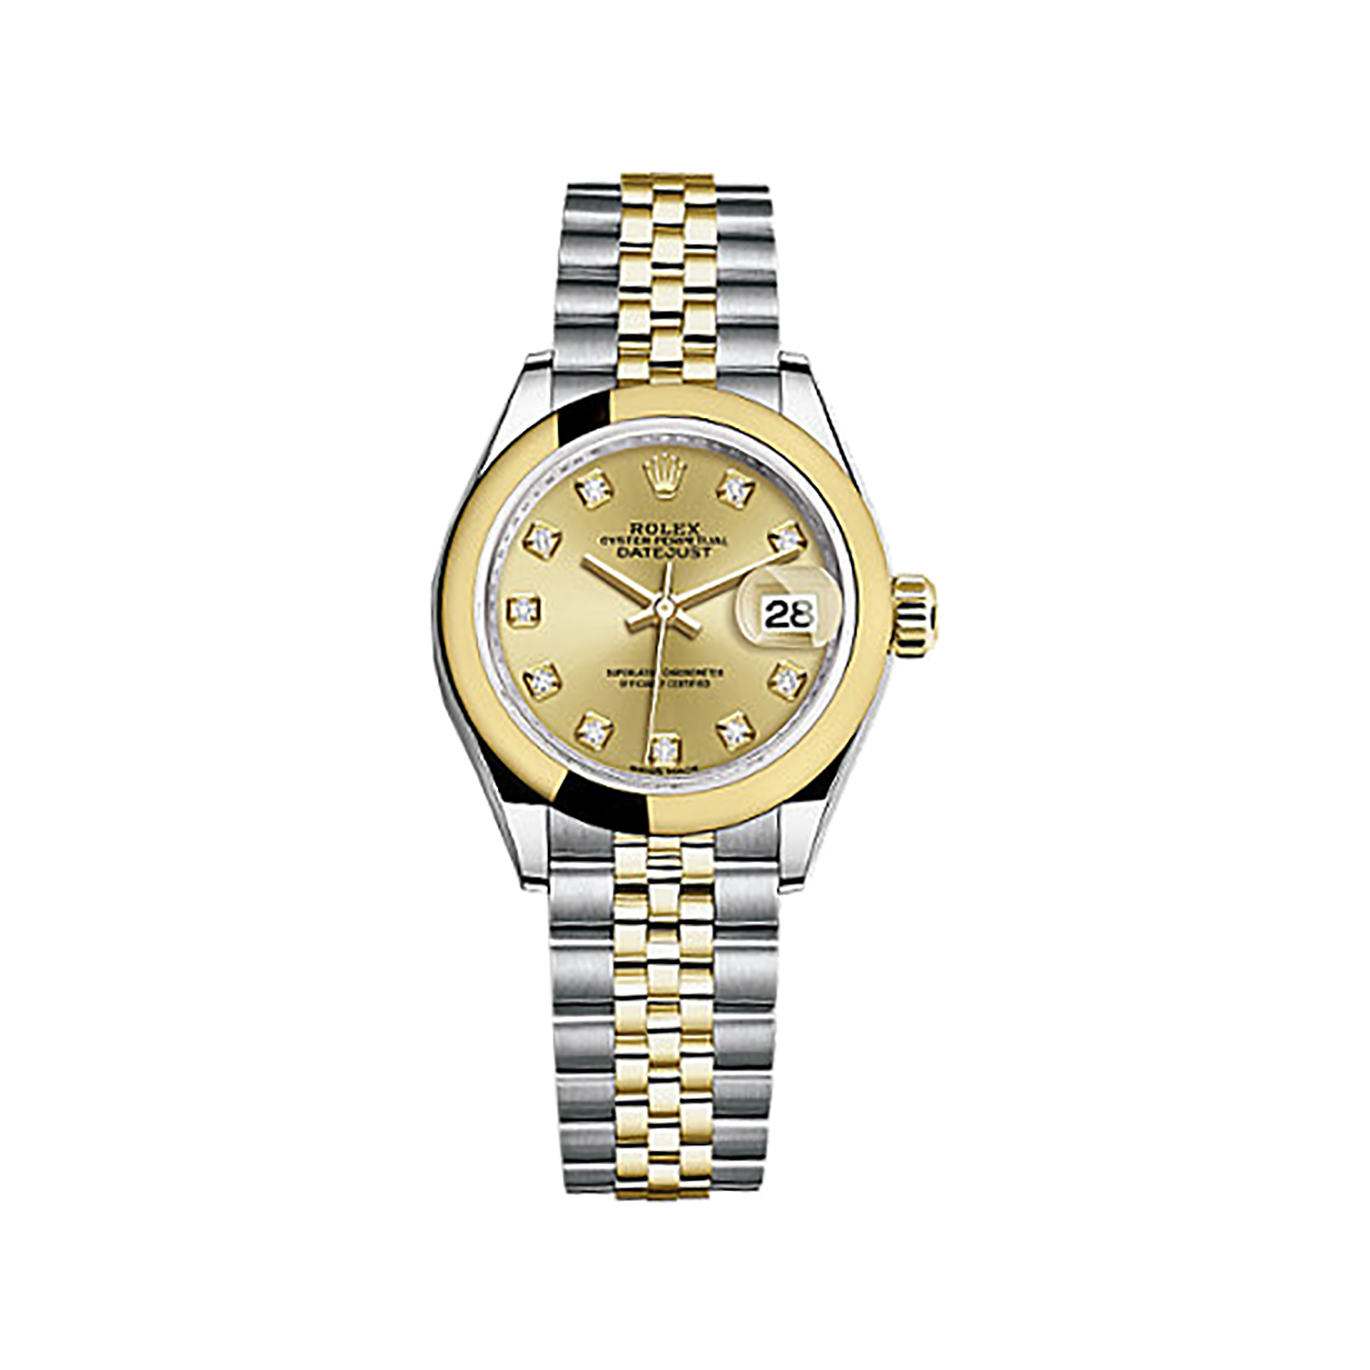 Lady-Datejust 28 279163 Gold & Stainless Steel Watch (Champagne Set with Diamonds)